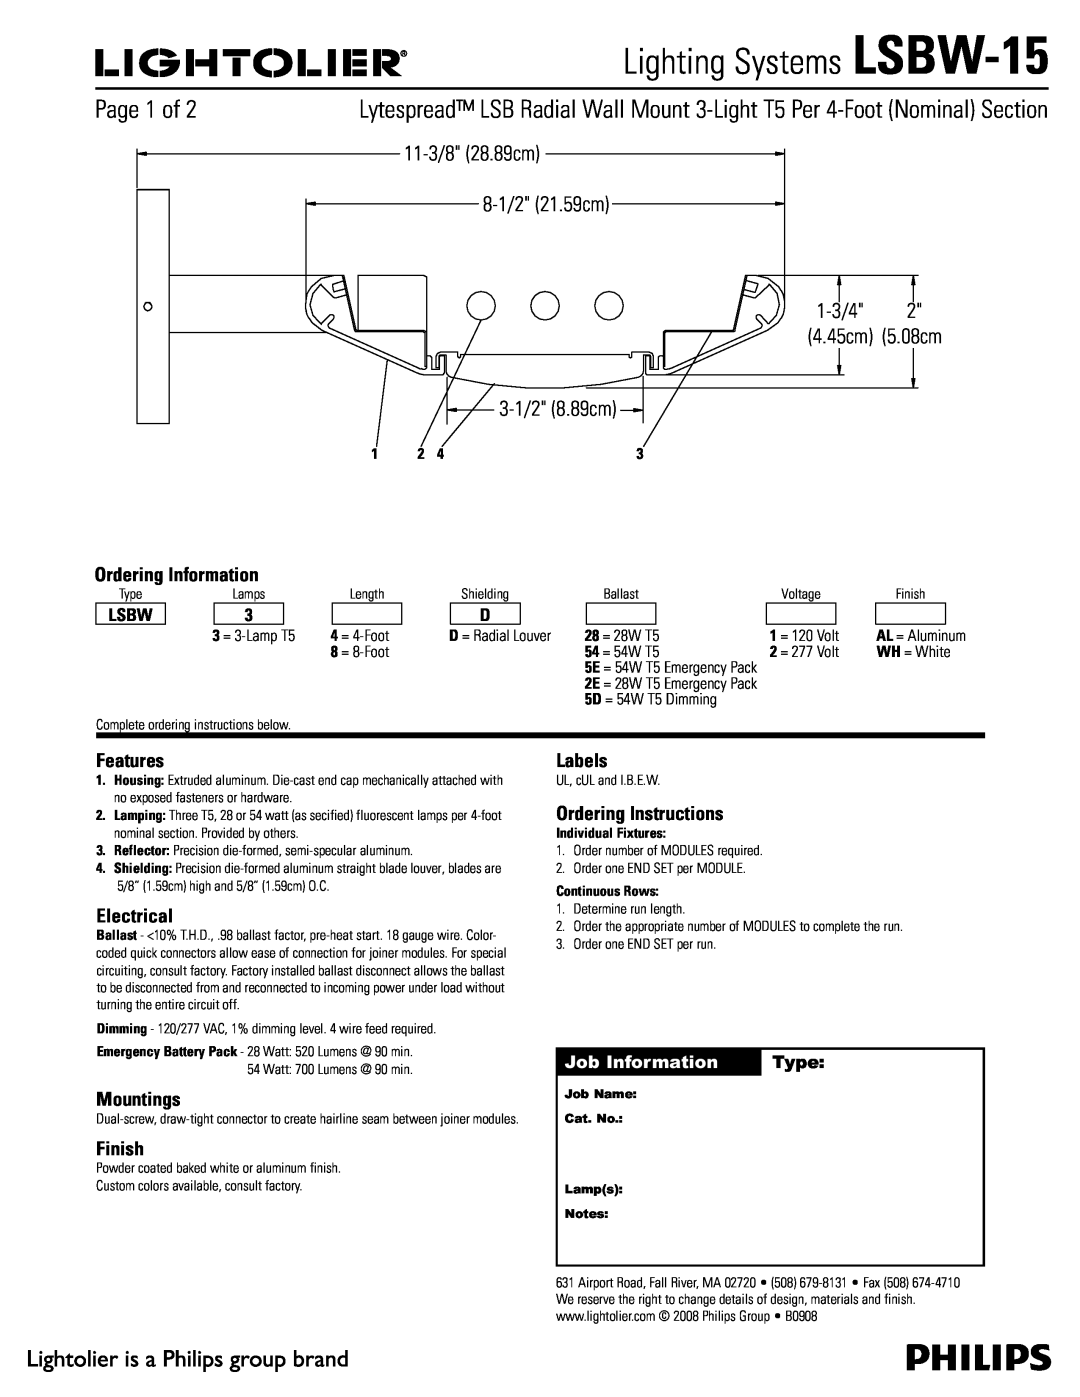 Lightolier LSBW-15 manual Ordering Information, Features, Electrical, Mountings, Finish, Labels, Ordering Instructions 